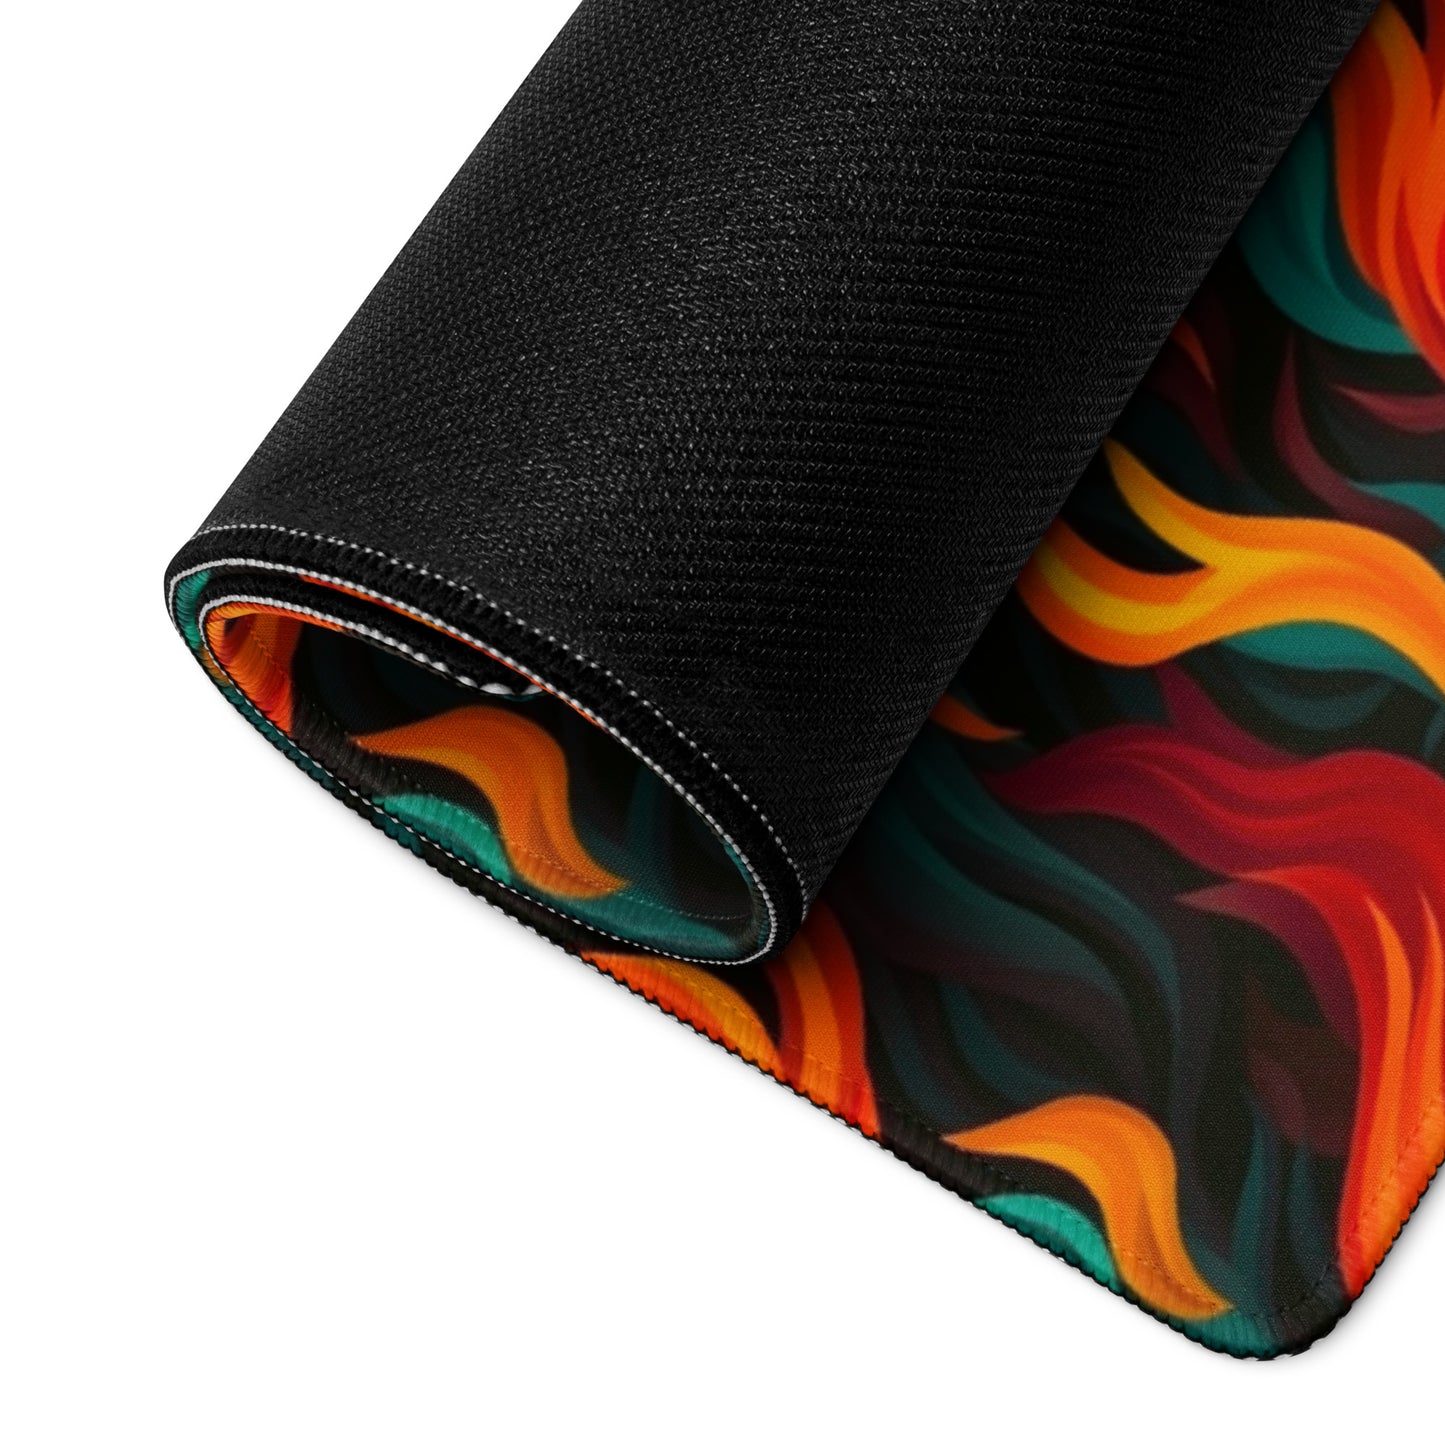 A 36" x 18" desk pad with a wavy flame pattern on it rolled up. Red and Teal in color.